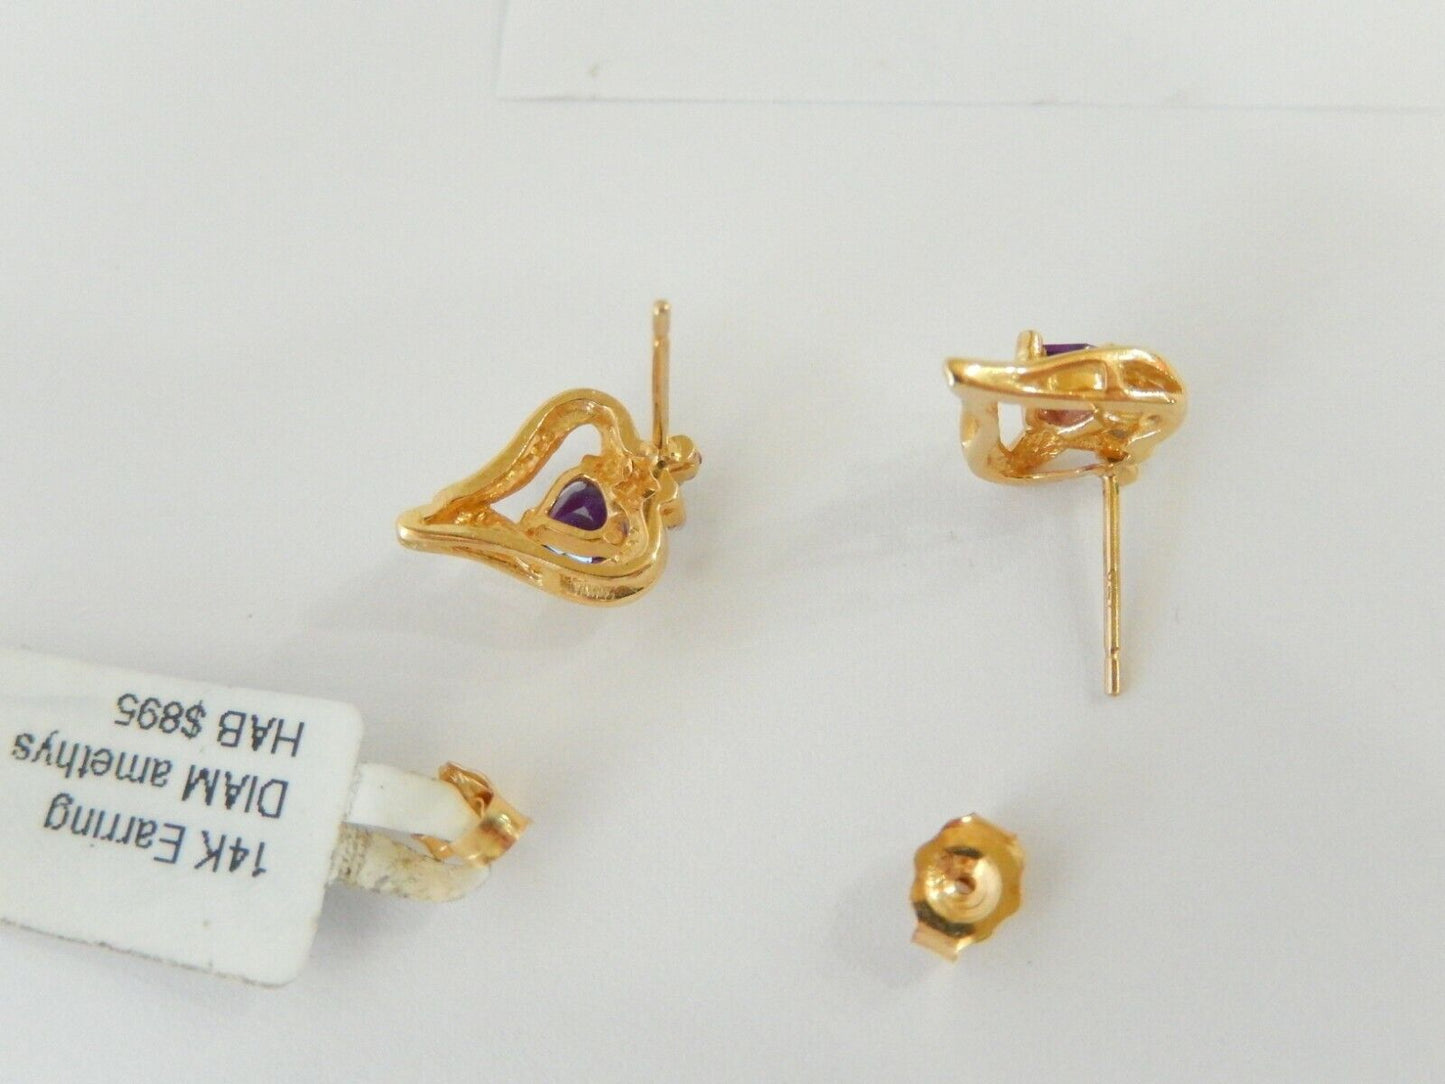 *NWT* 14K Yellow Gold Heart Shaped Post Earrings With Amethyst & Diamonds